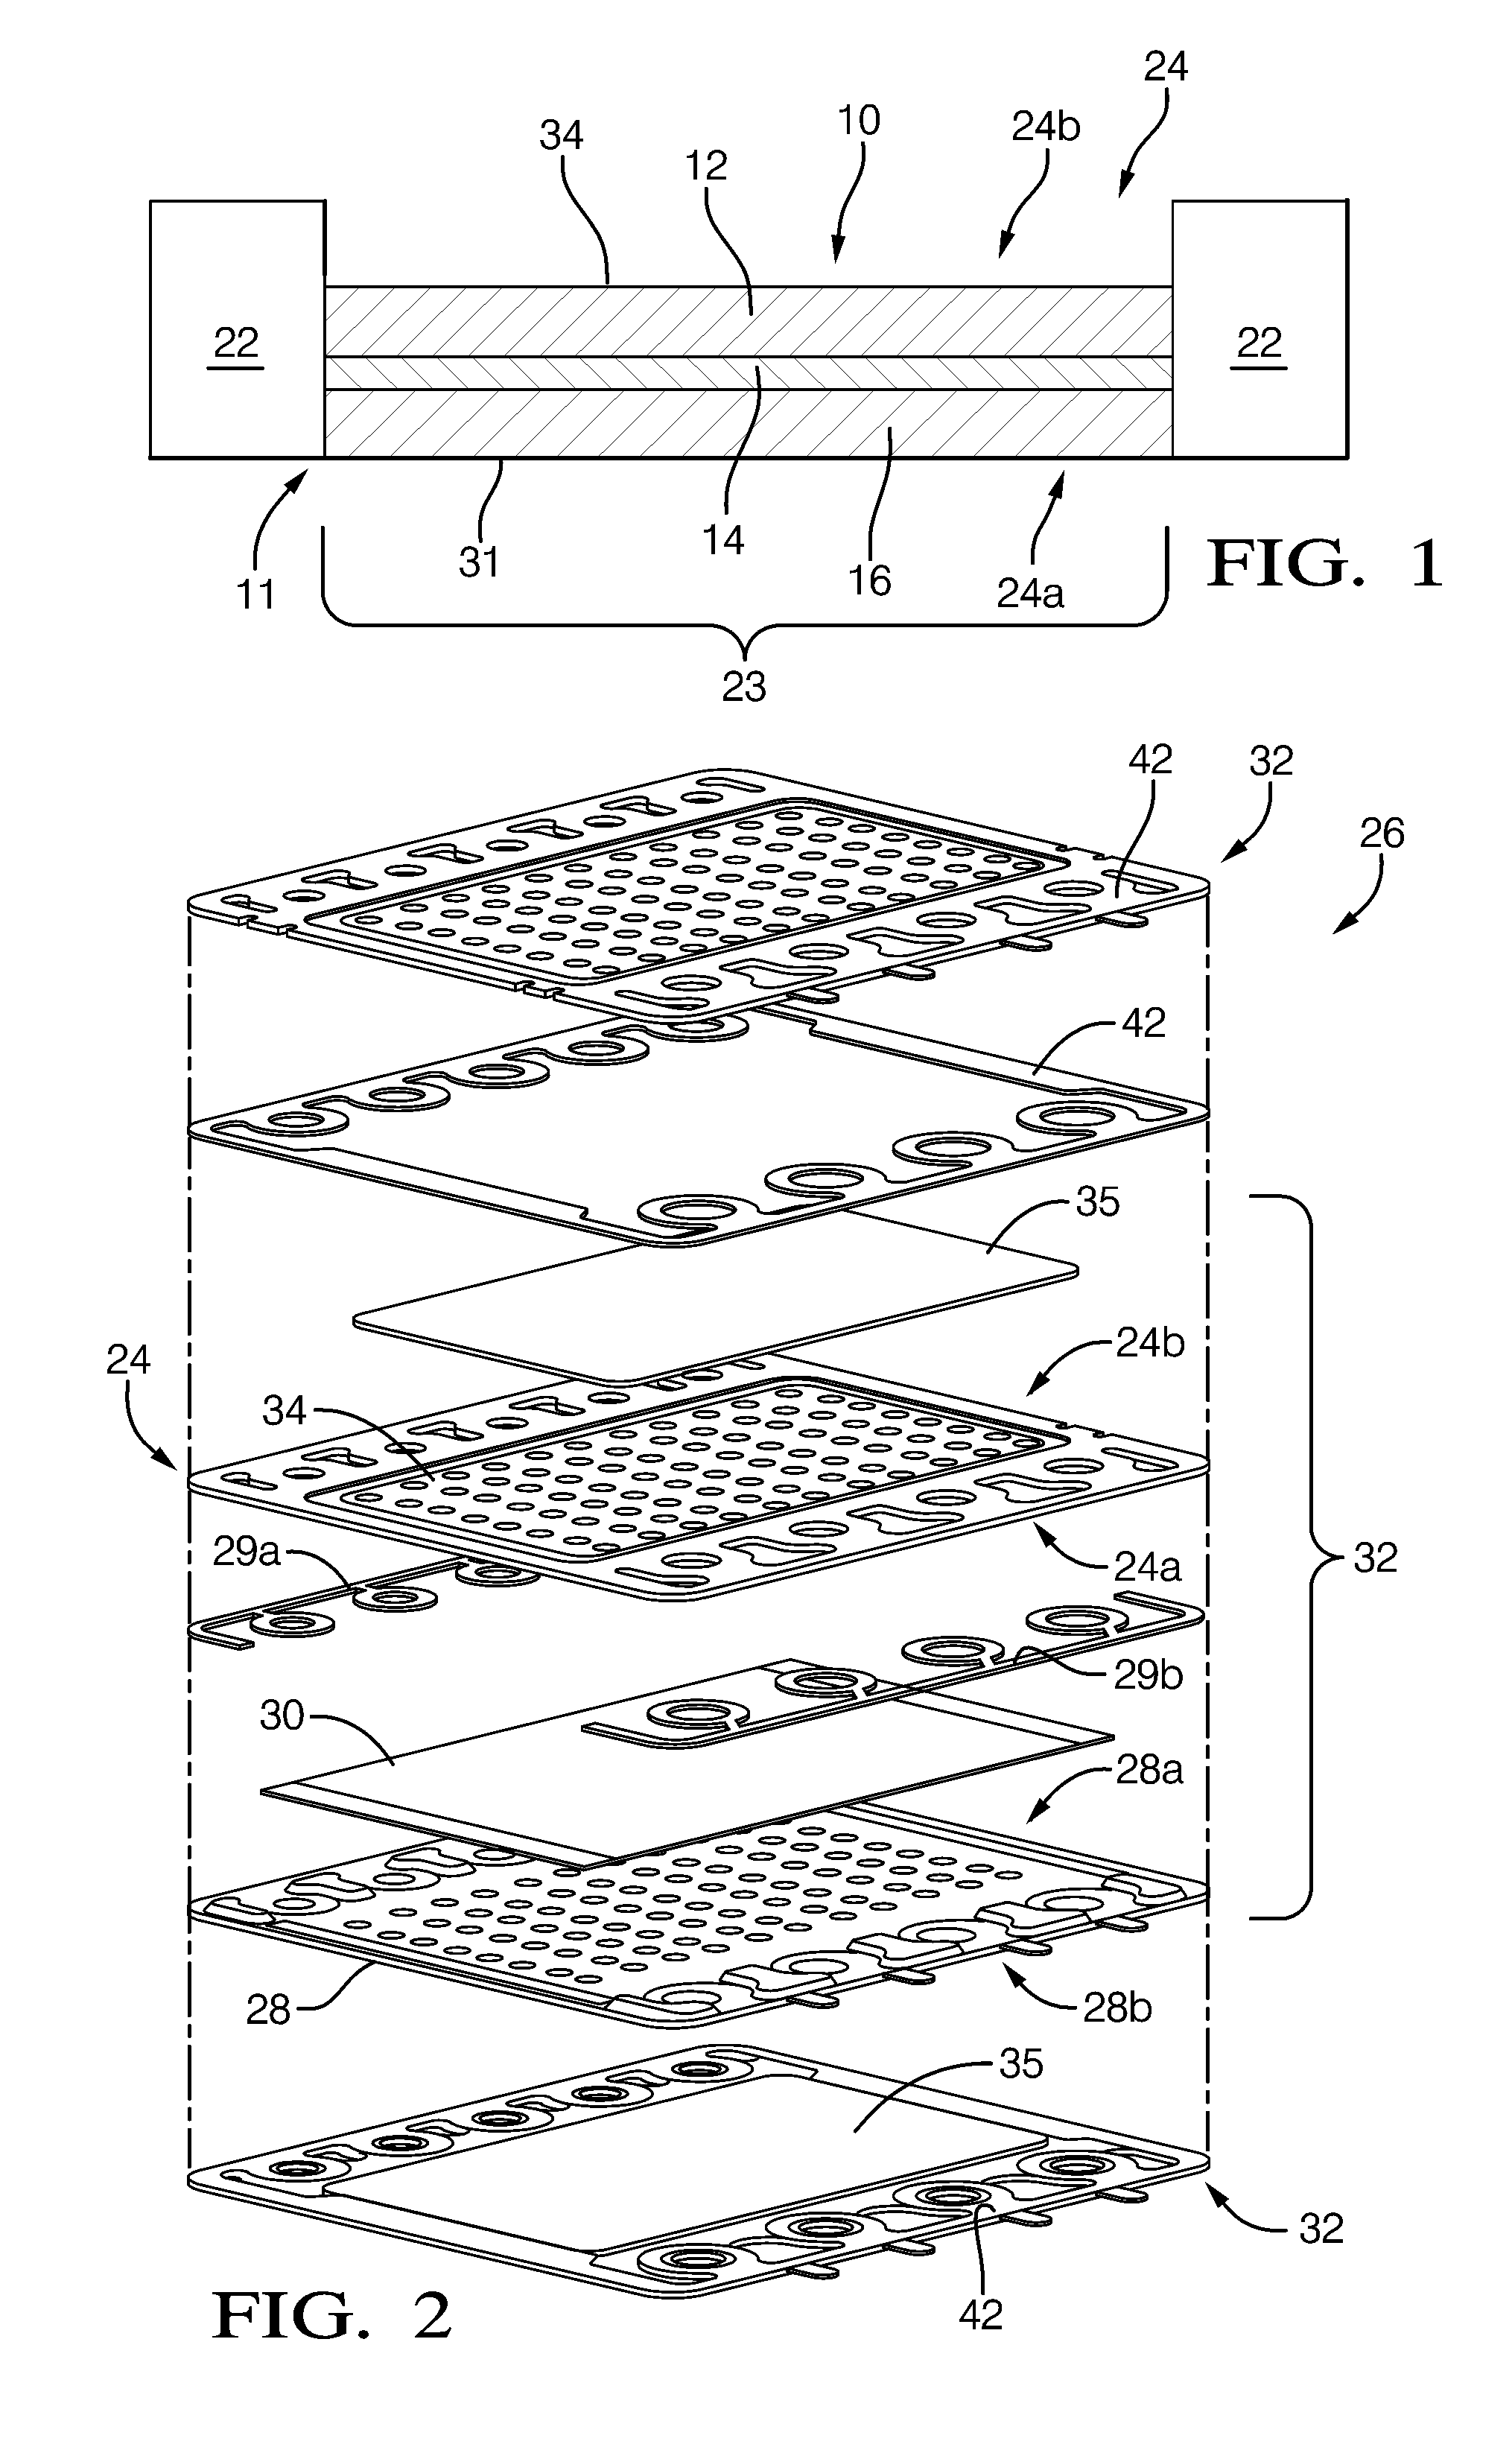 Method of making a solid oxide fuel cell stack